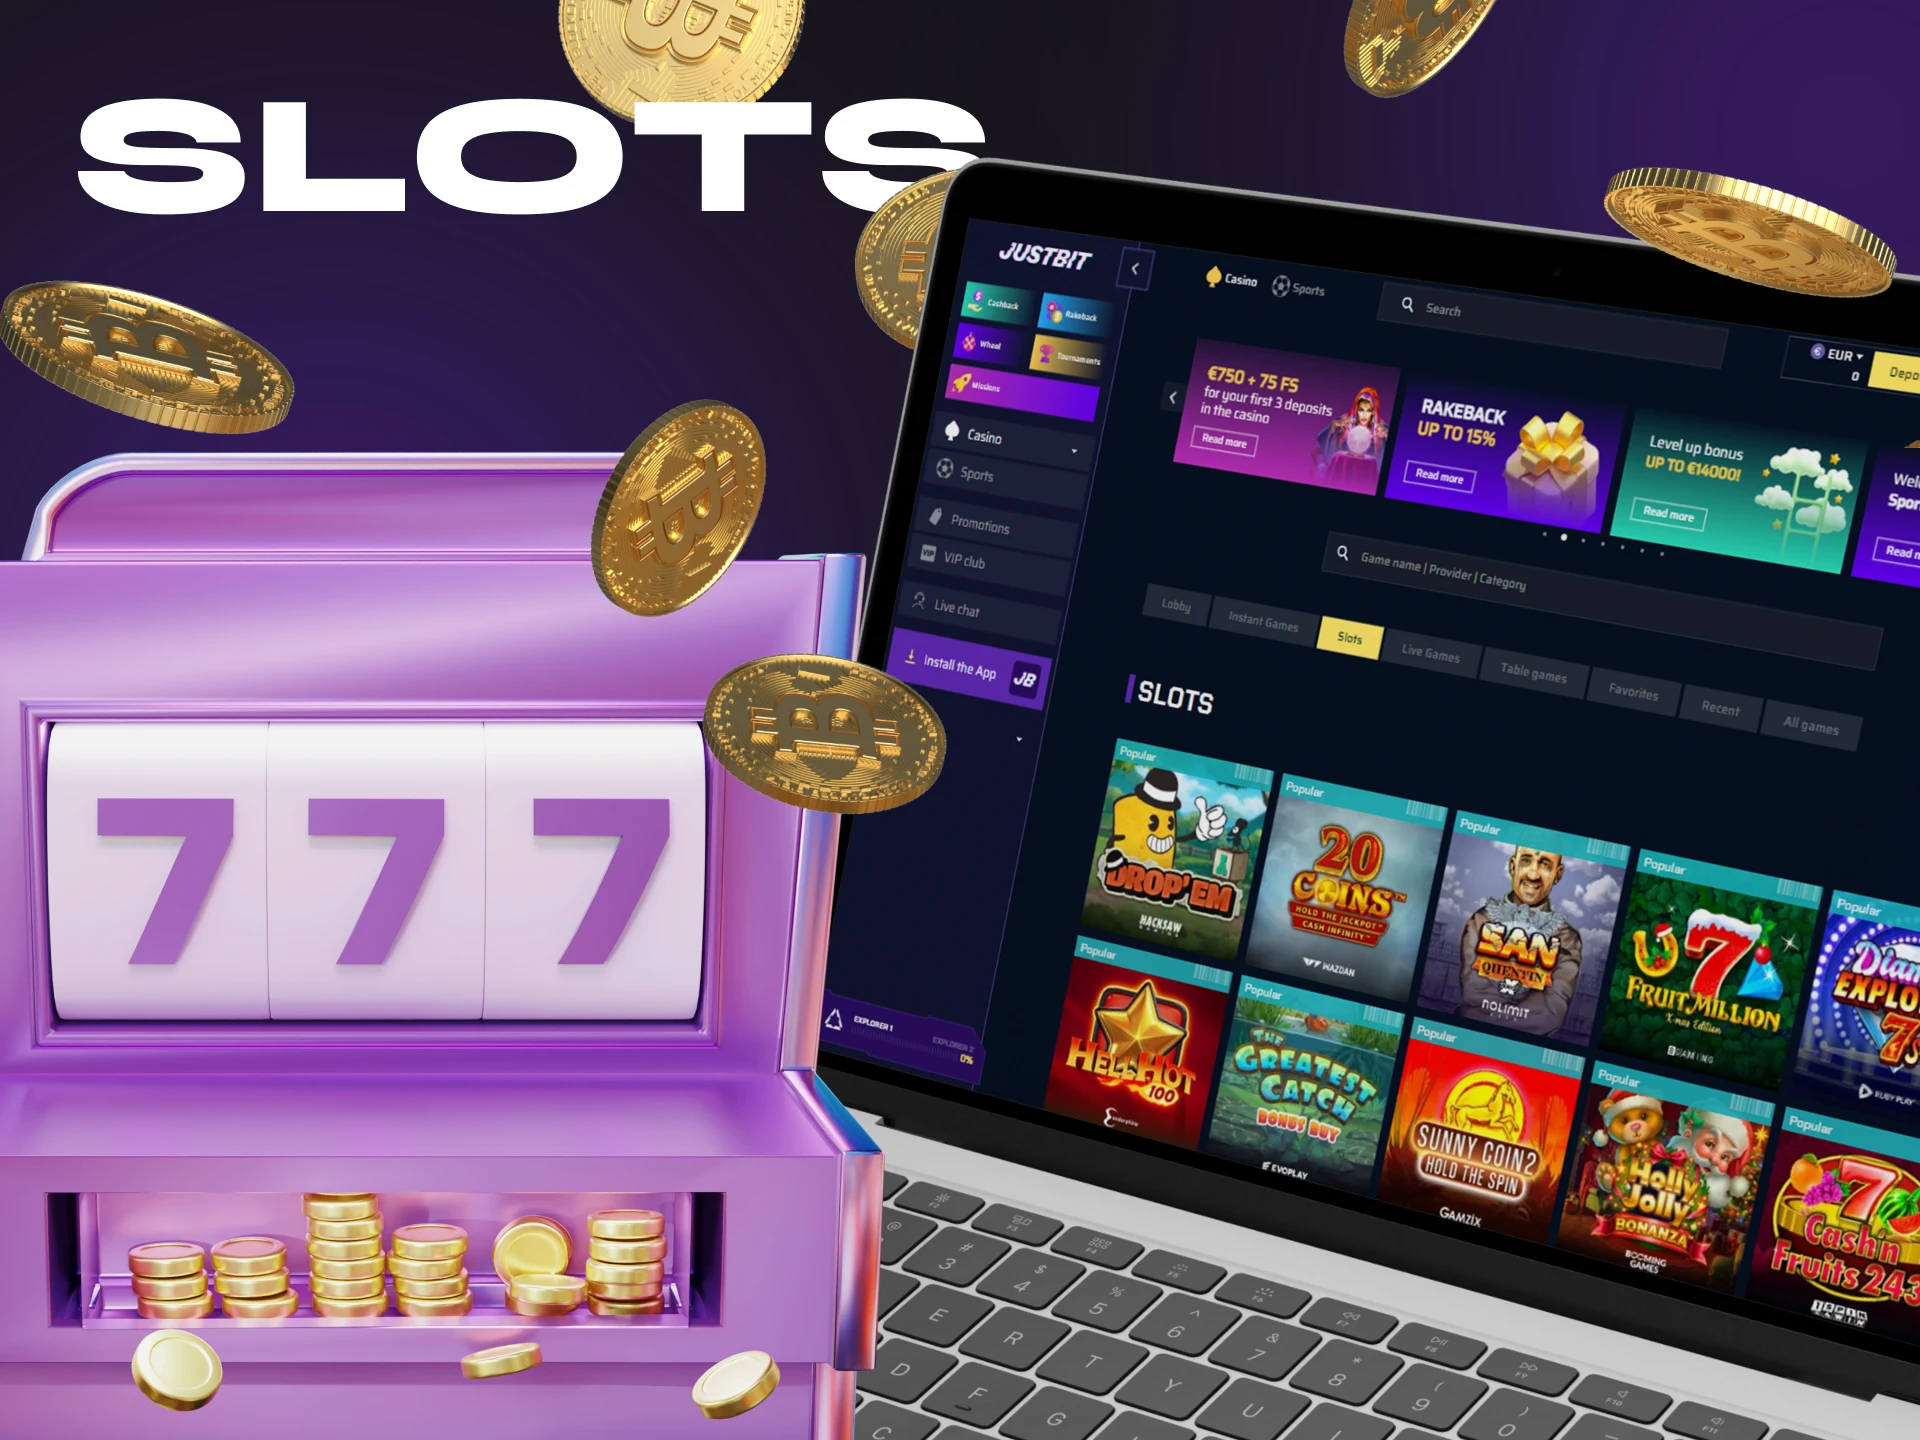 Justbit Casino has one of the largest slots games sections of many crypto casinos.